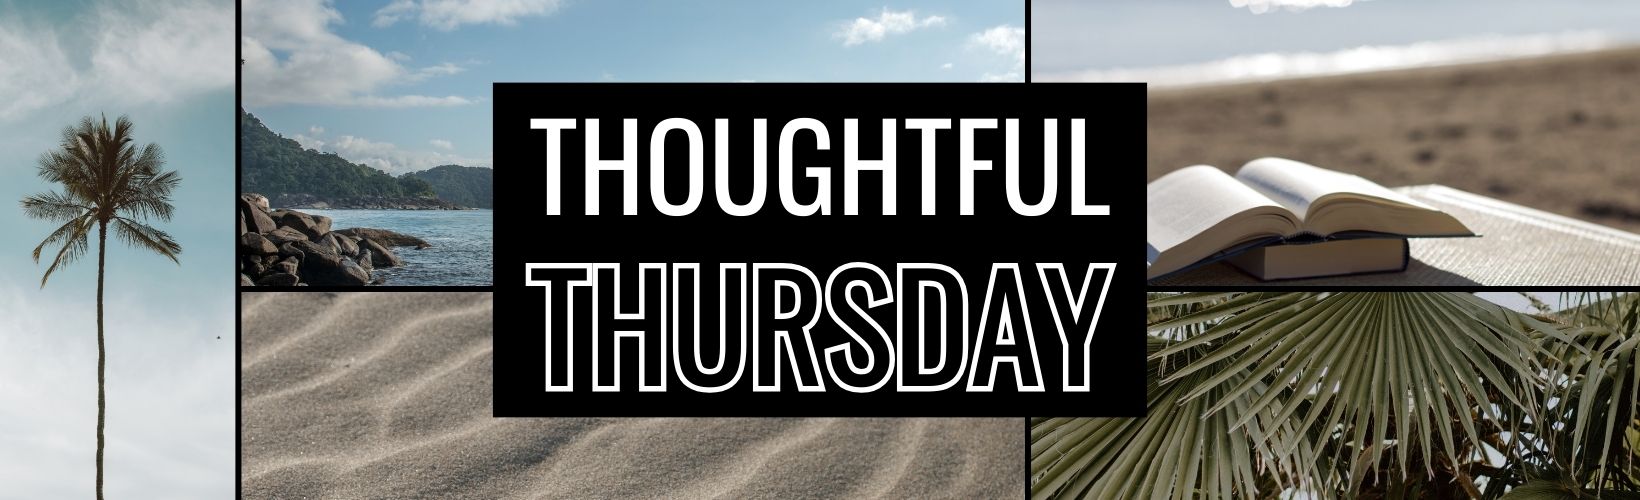 Thoughtful Thursday: How to Practice Gratitude and Service on Thoughtful Thursday